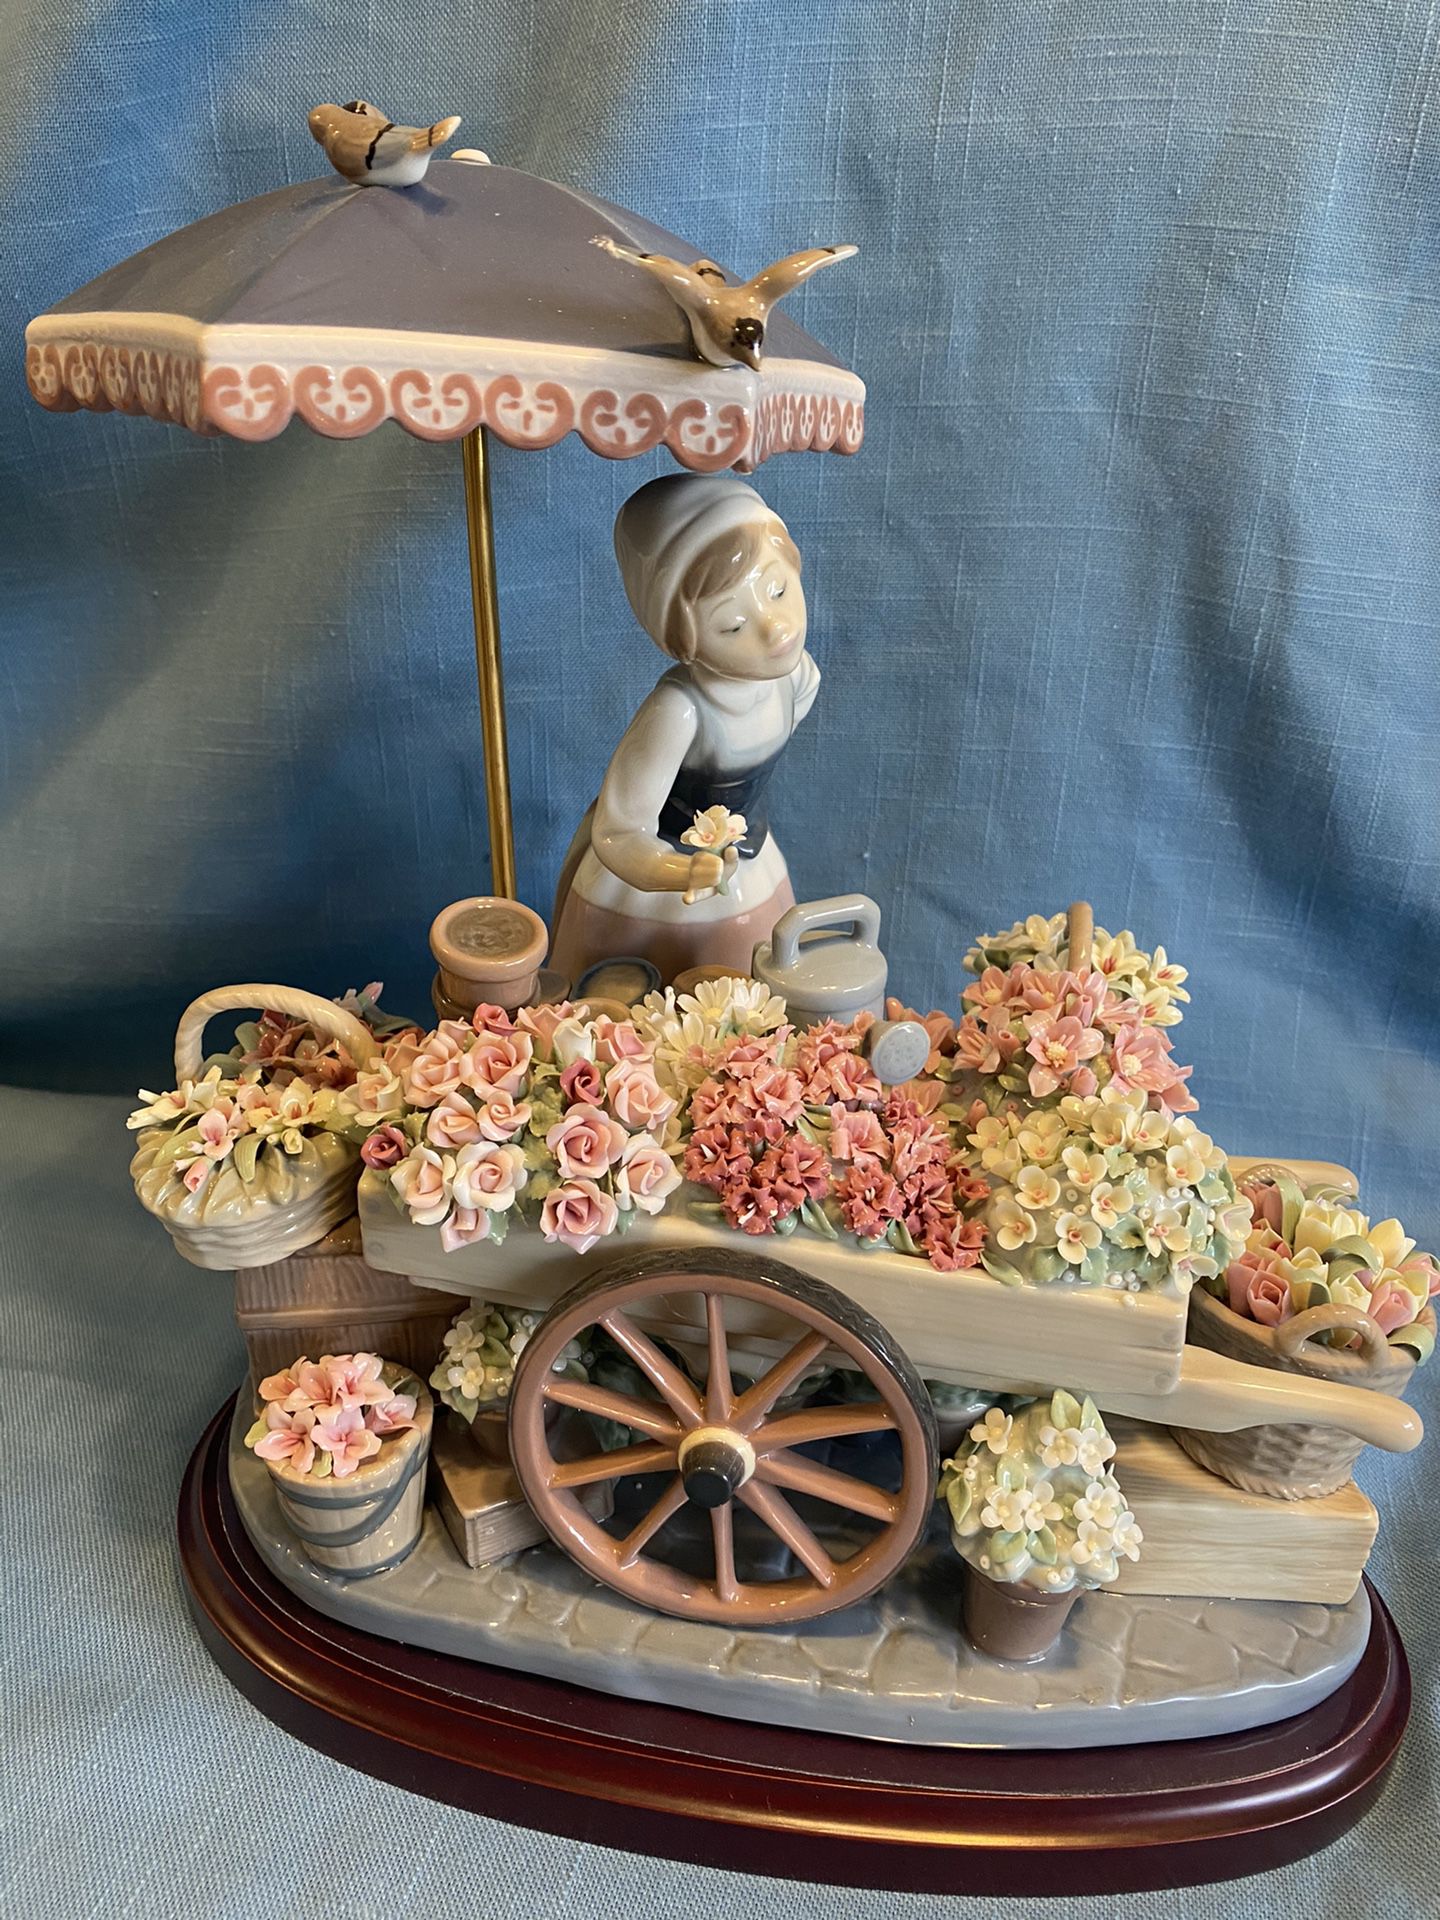 Large Retired Lladro flowers of the season figurine #1454 in excellent condition with base asking $1200 OBO